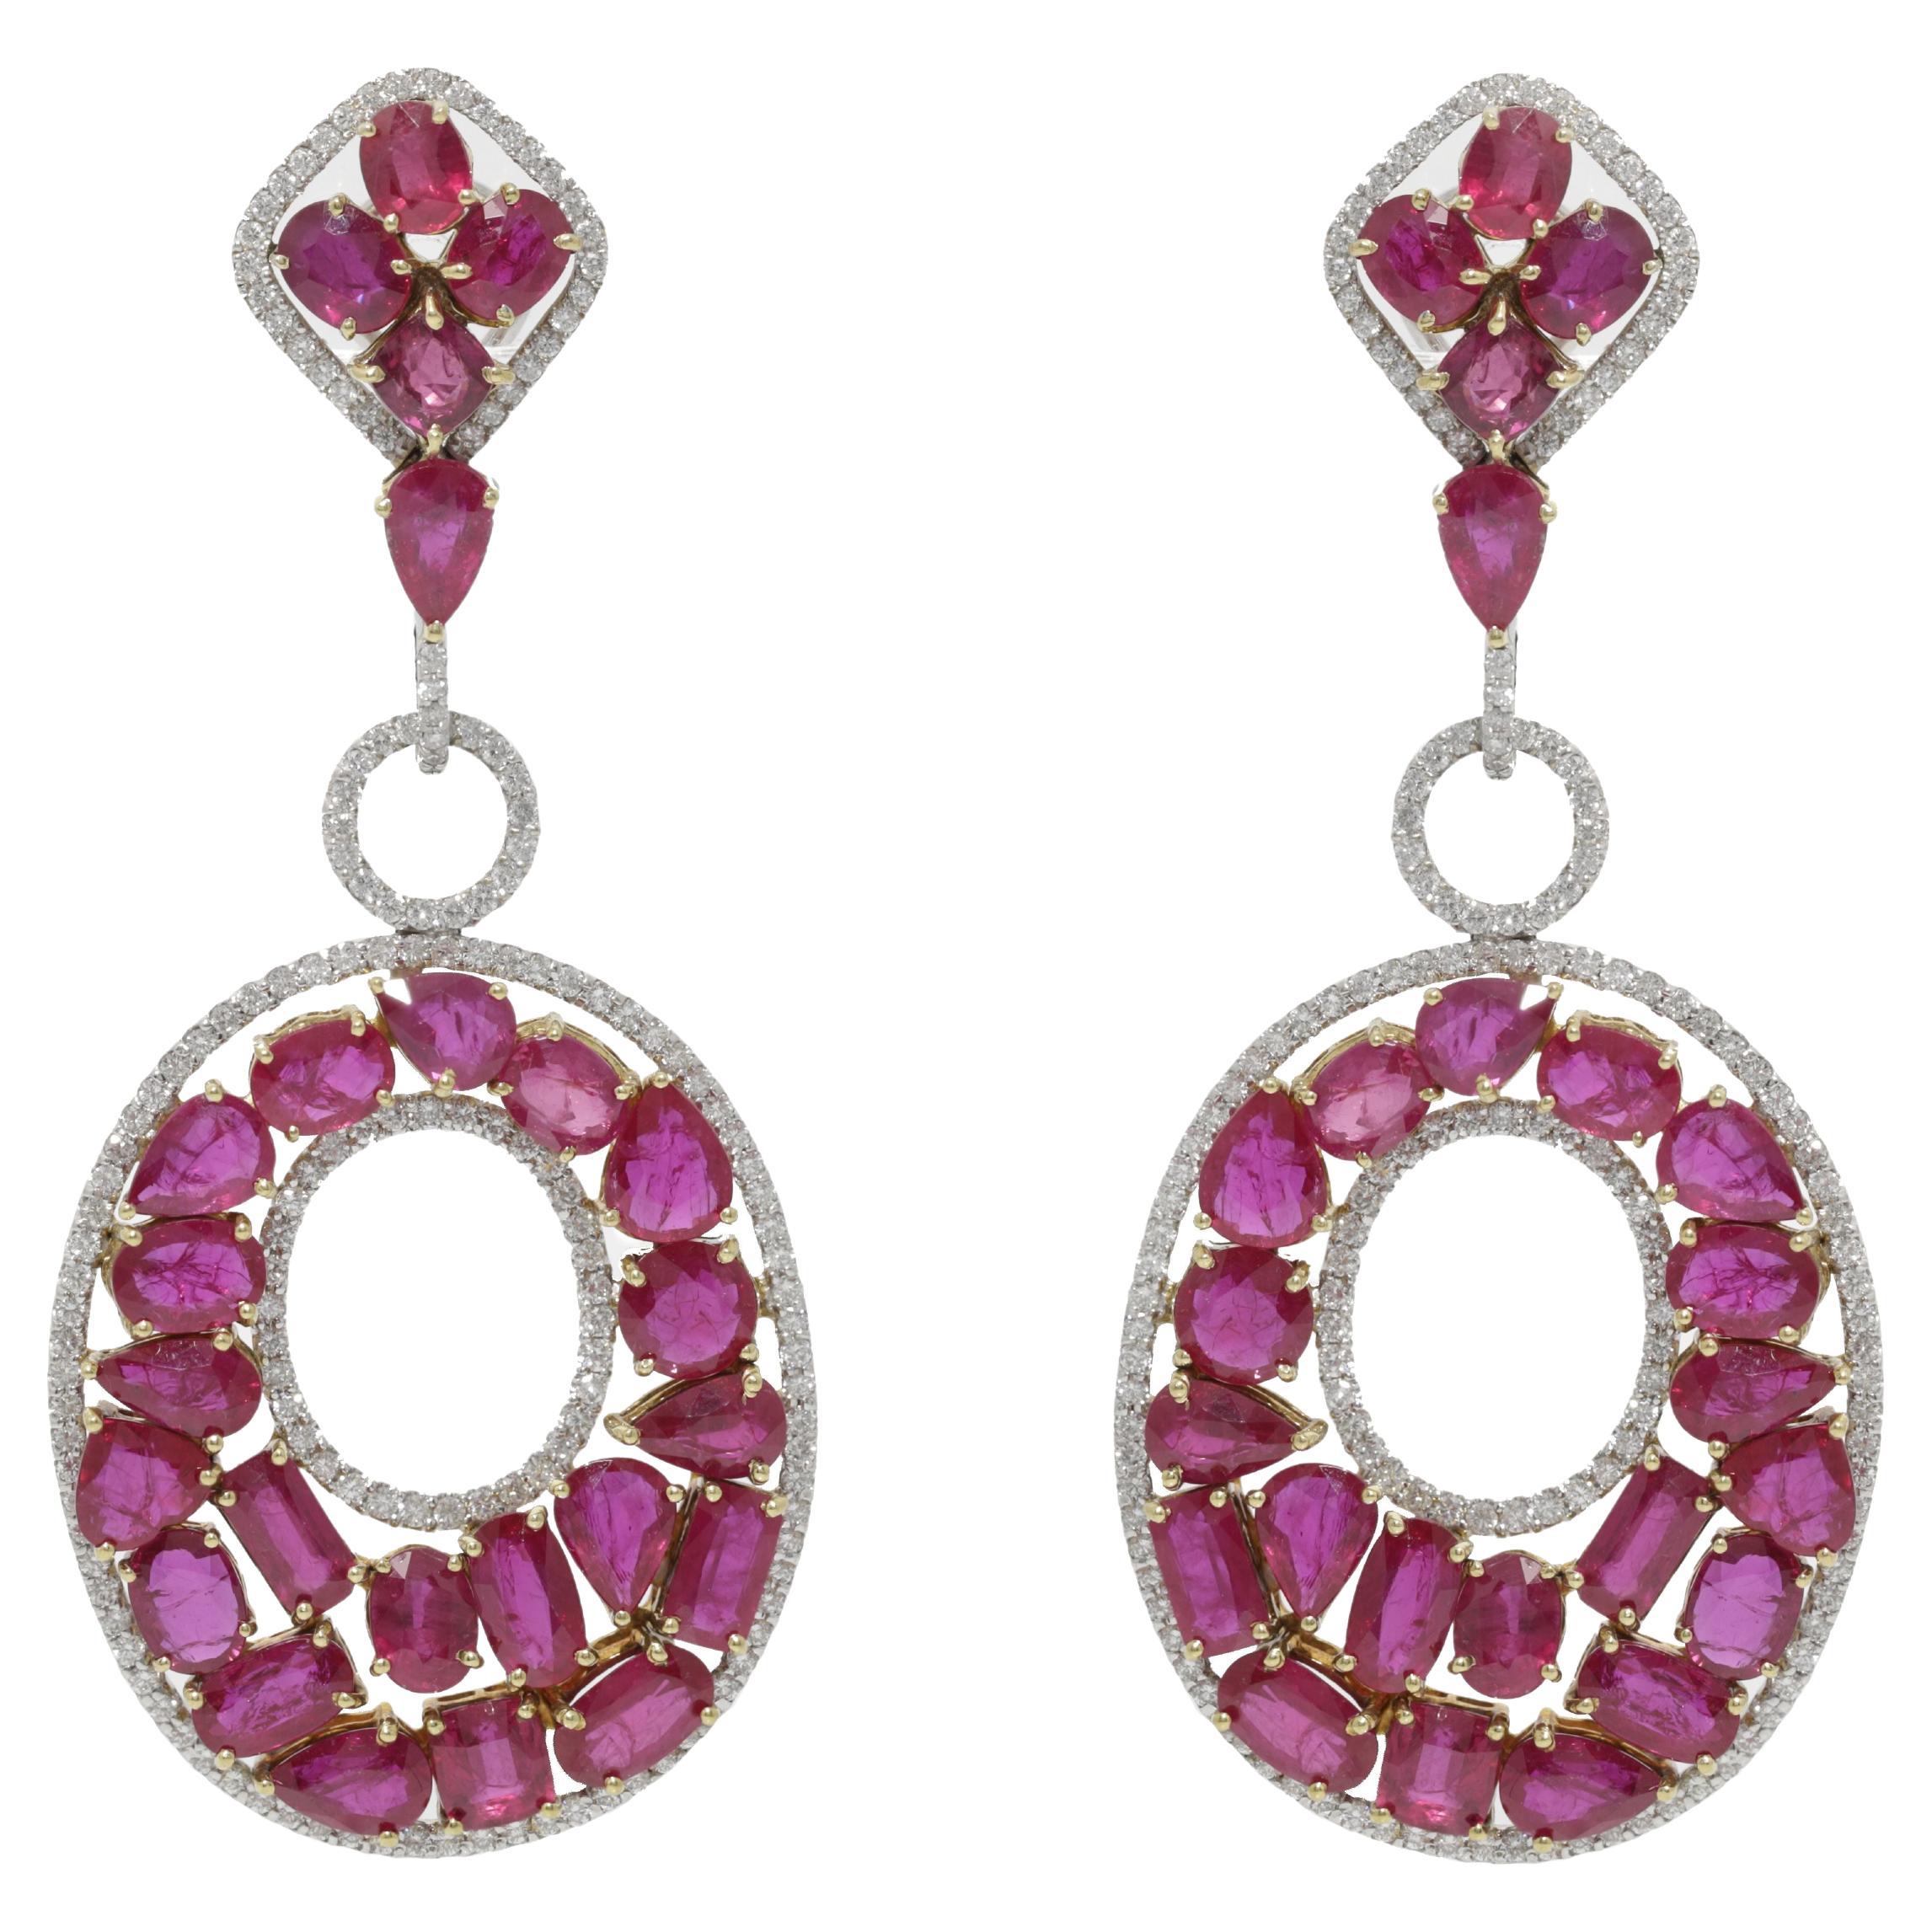 Diana M. 53.20 Carat Ruby and Diamond Earrings For Sale